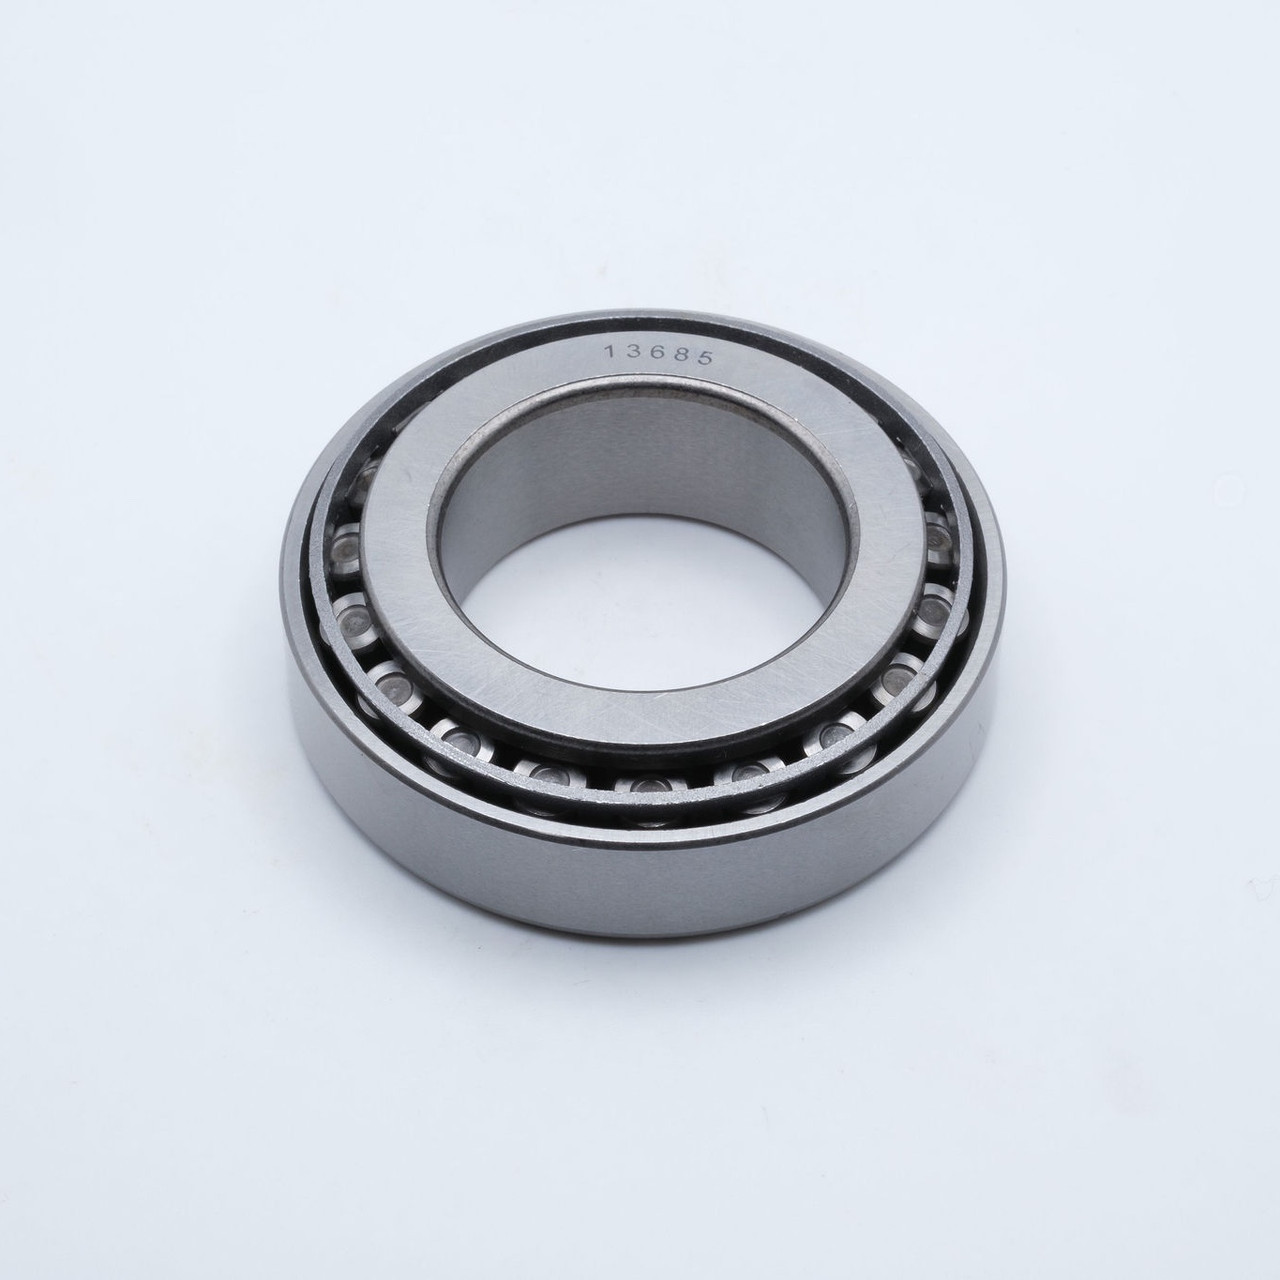 L68149/10 - A13 Tapered Roller Bearing Set Back View